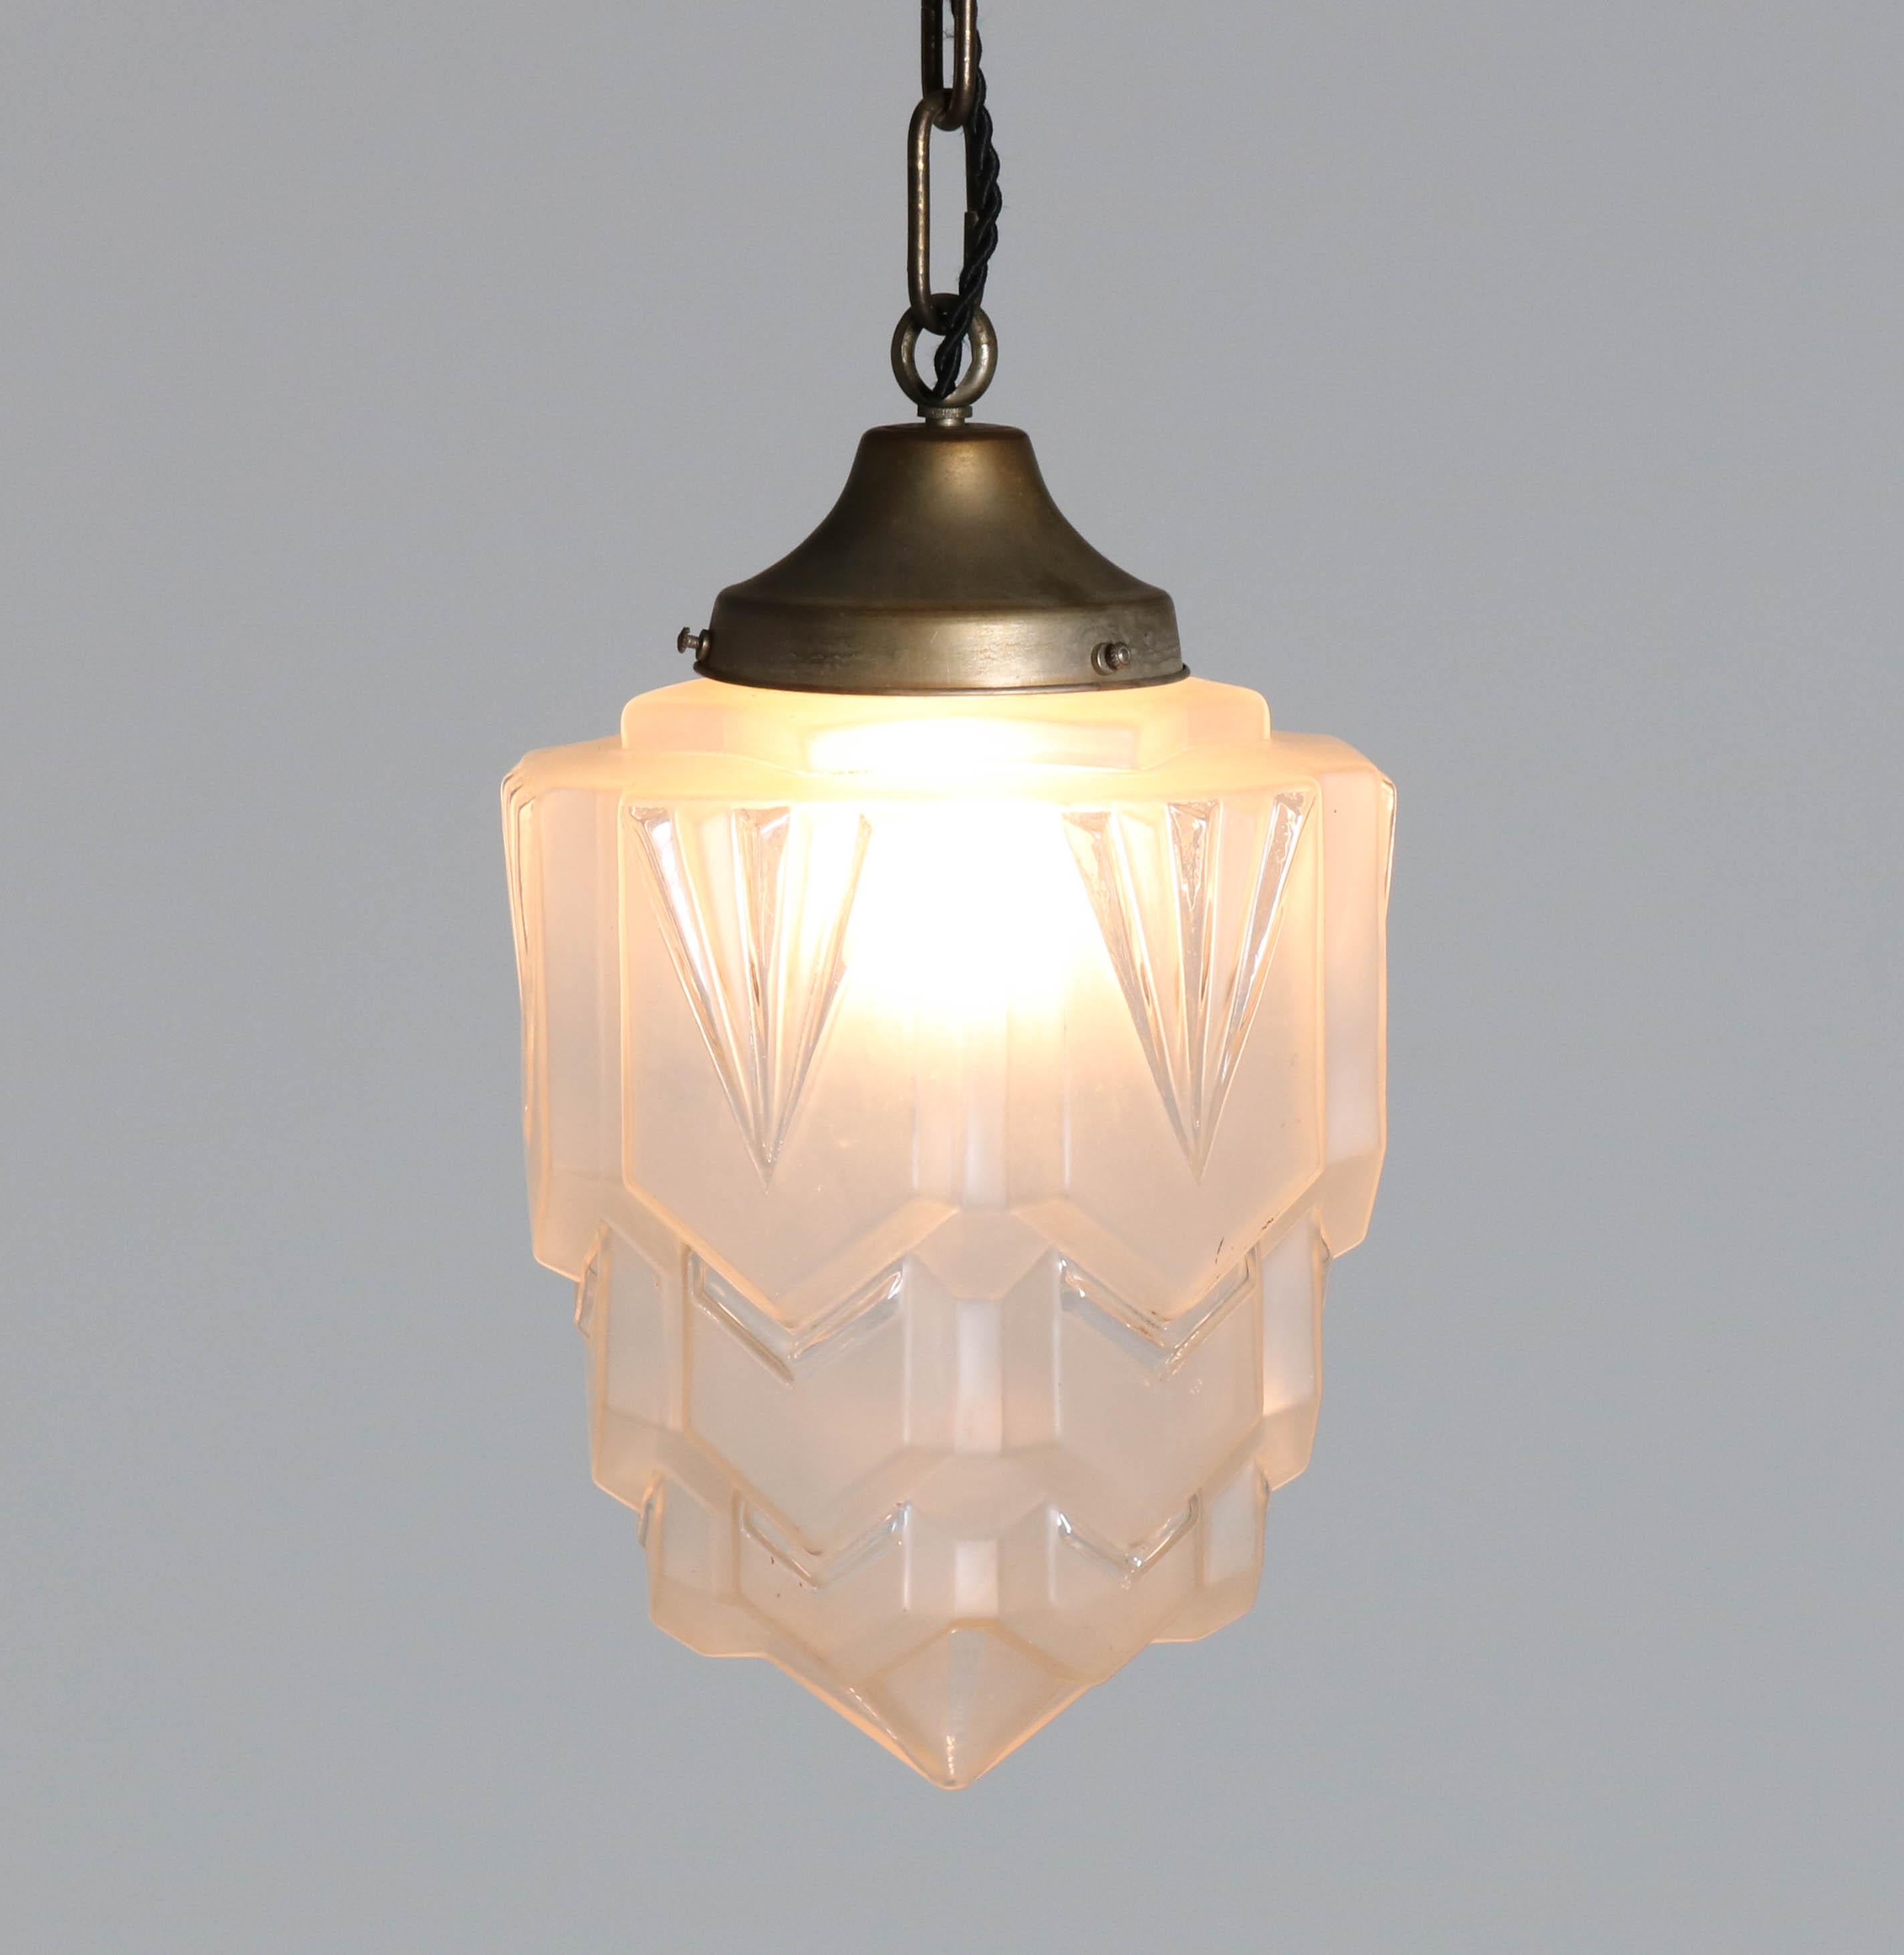 Mid-20th Century Brass French Art Deco Pendant with Original Glass Shade, 1930s